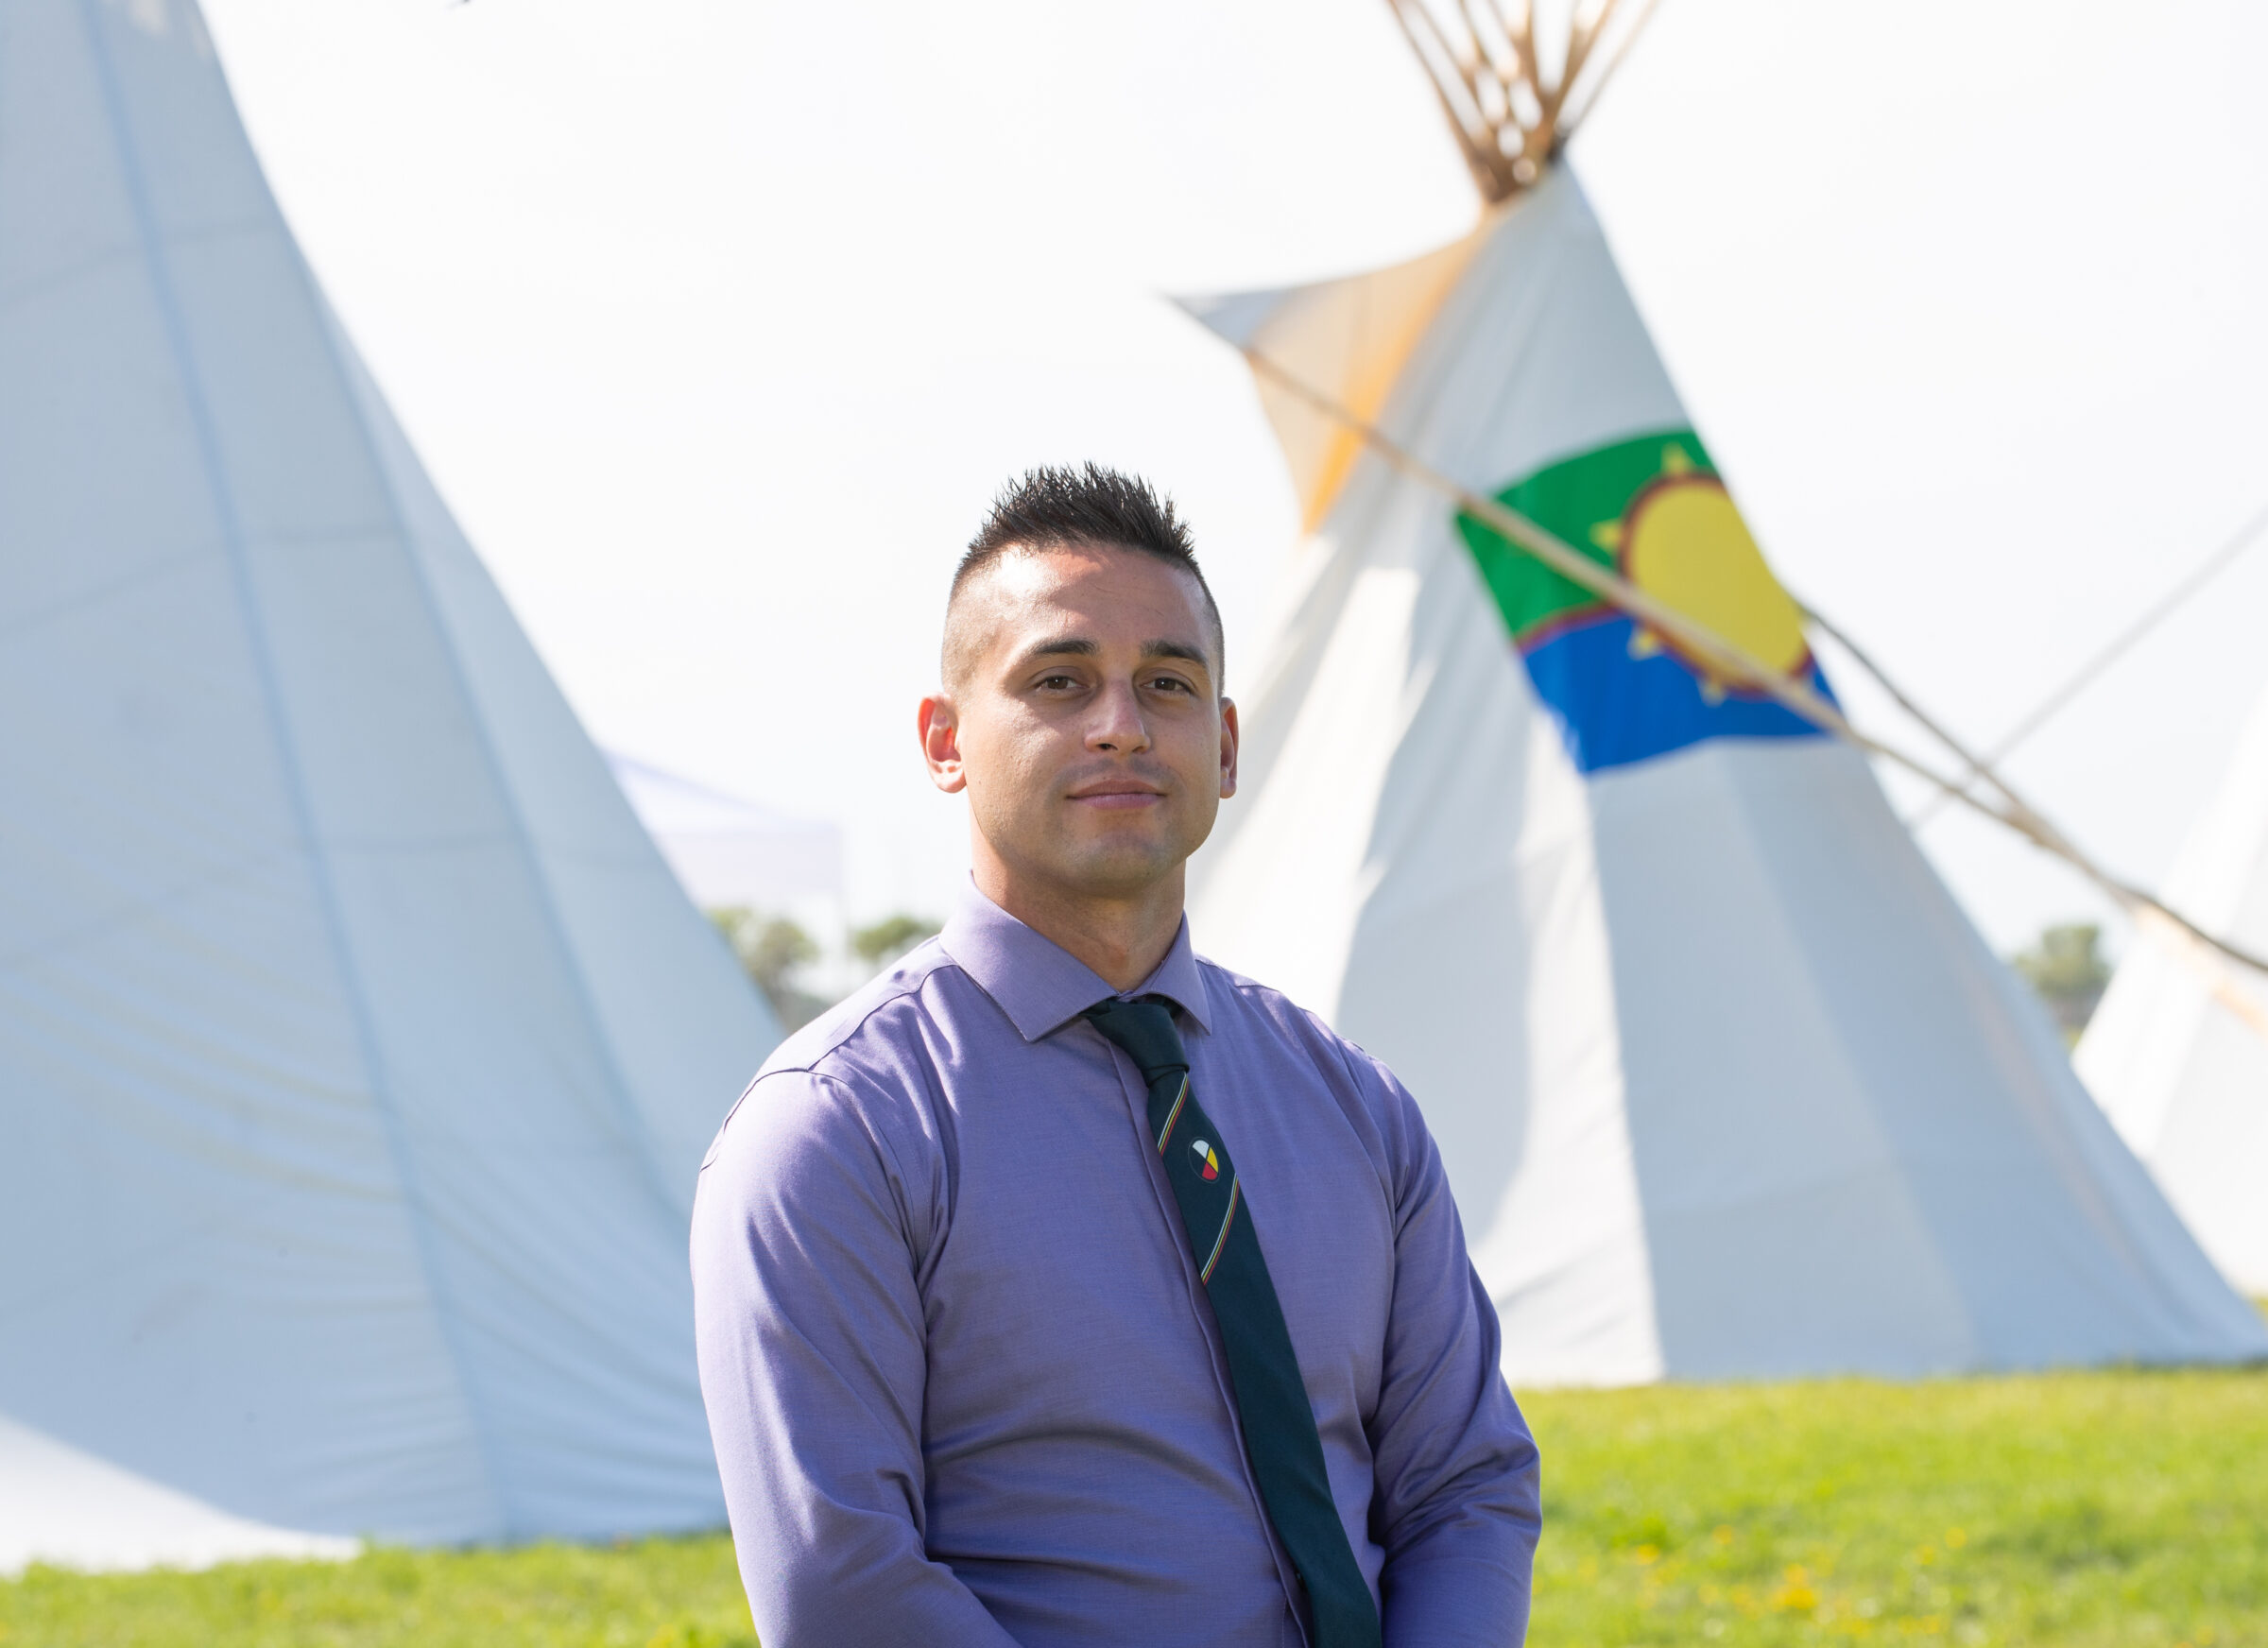 RRC Polytech alumni member Vic Savino in front of two teepees.